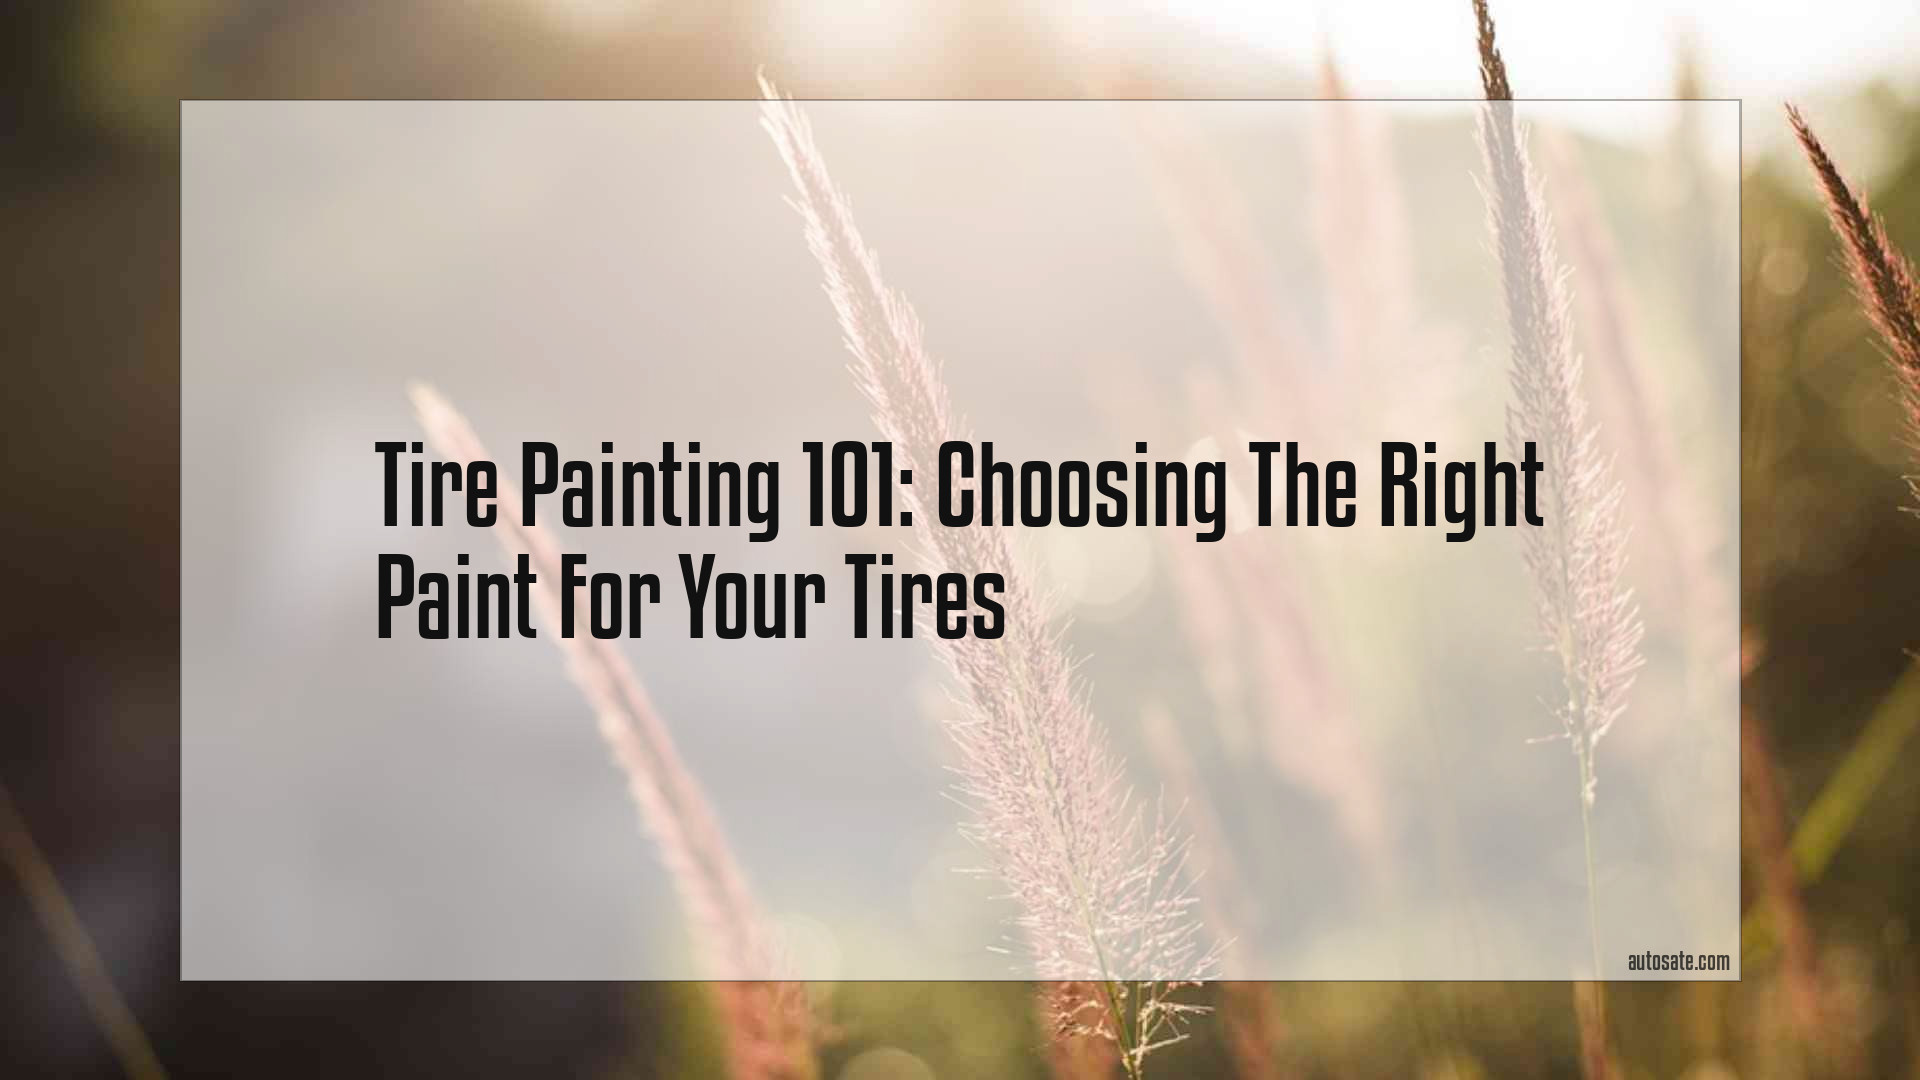 Tire Painting 101: Choosing The Right Paint For Your Tires